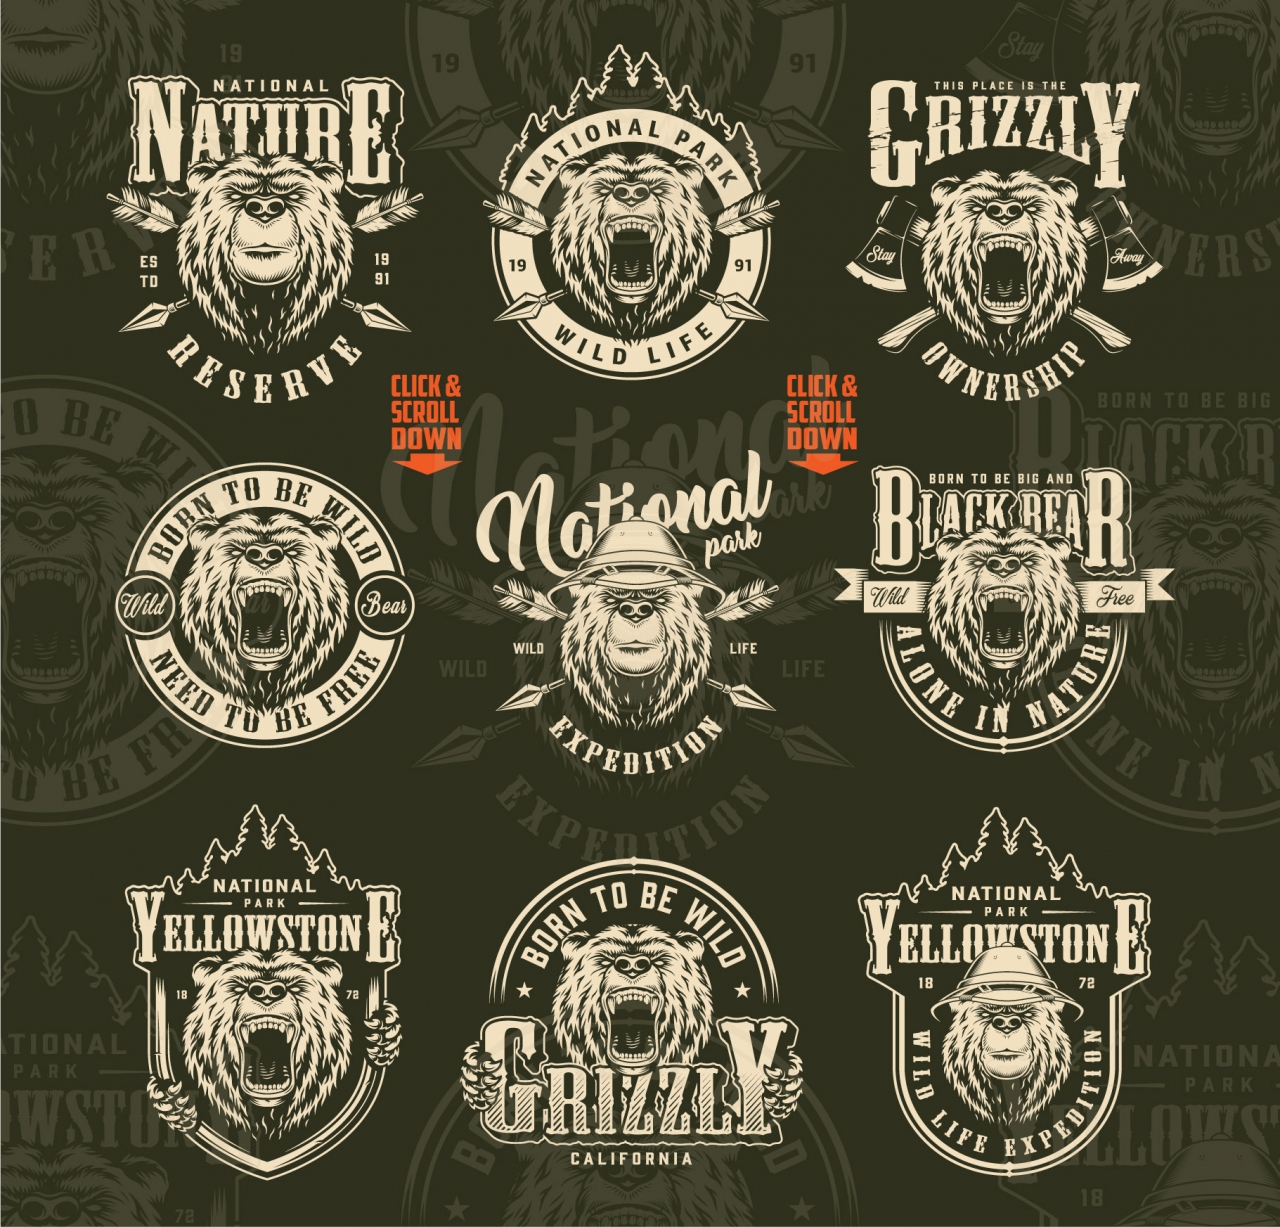 Vintage monochrome style outdoor and wild life designs collection with ferocious and serious bear heads with and without safari hat, crossed arrows and axes on dark background